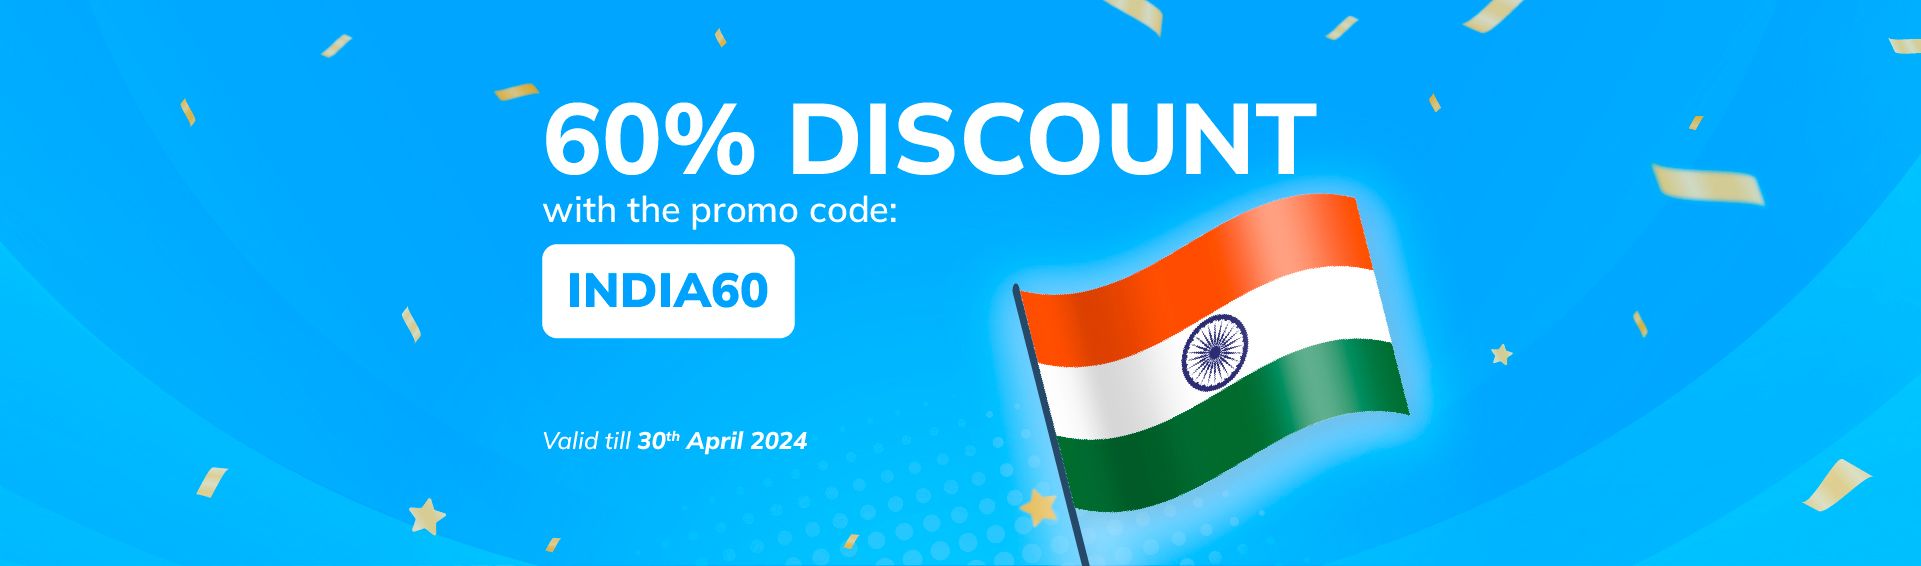 60% Discount Fee for Transfers to India